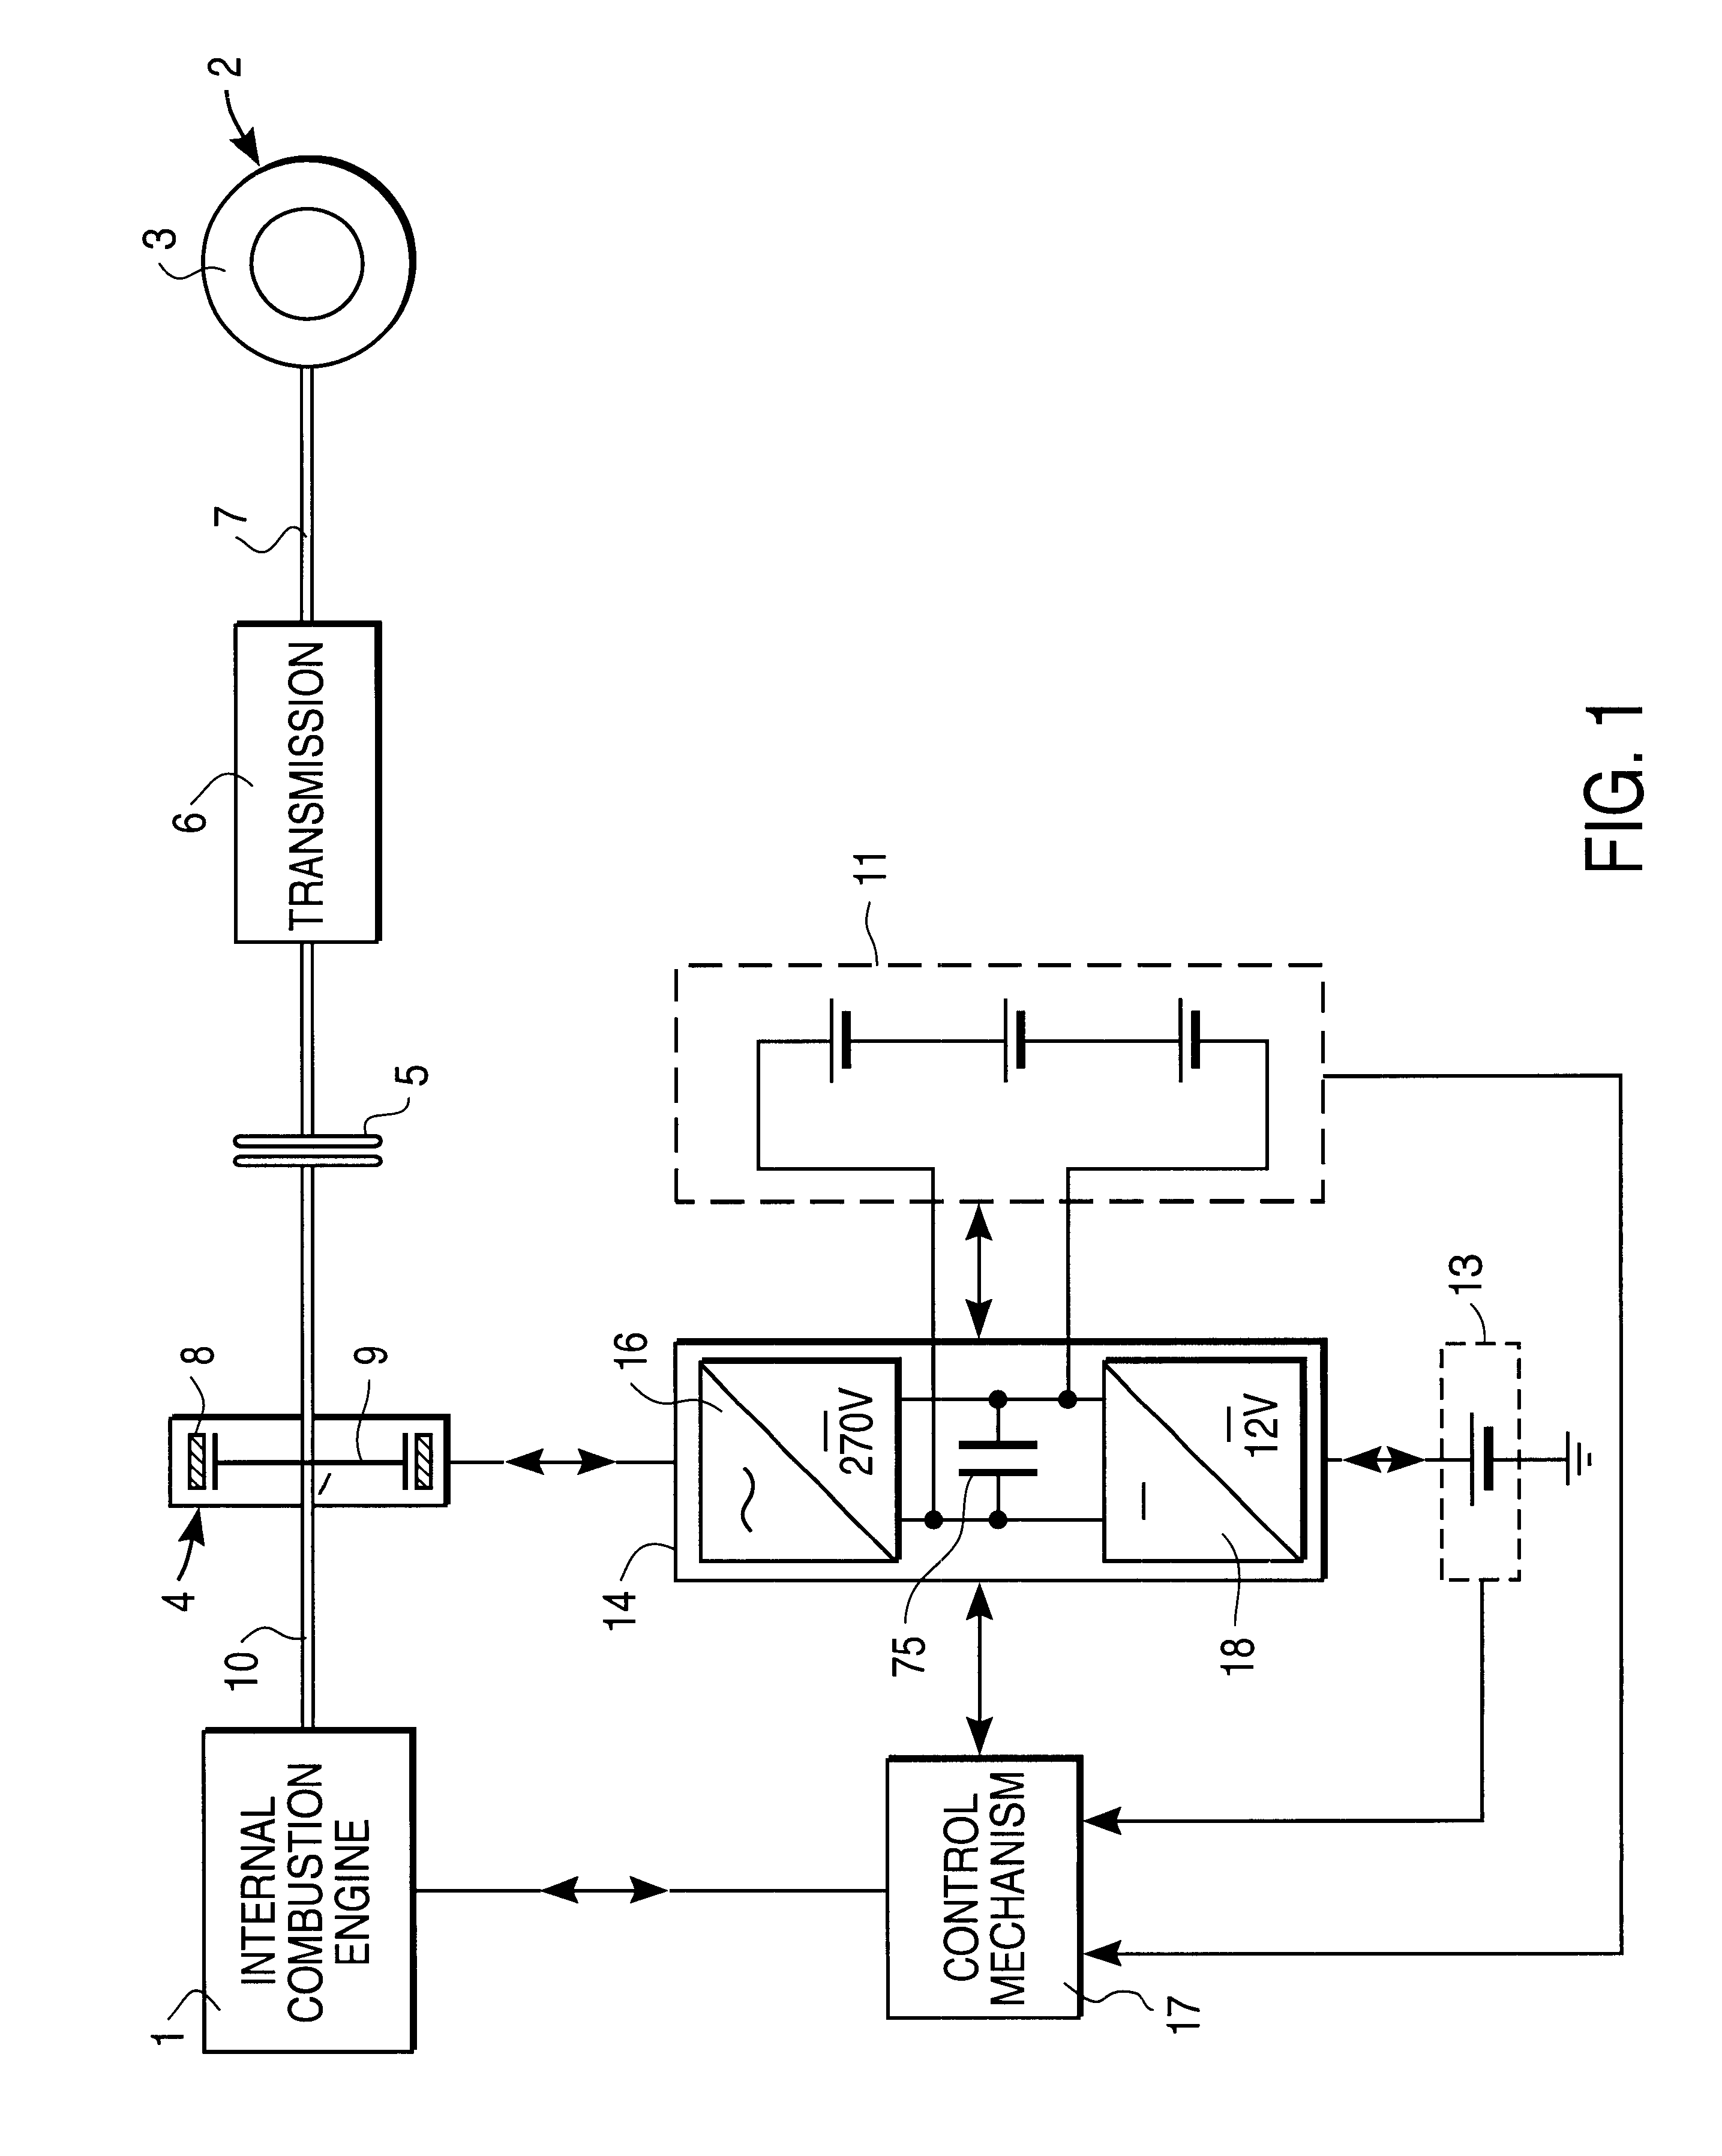 Drive system with drive-motor, electric machine and battery